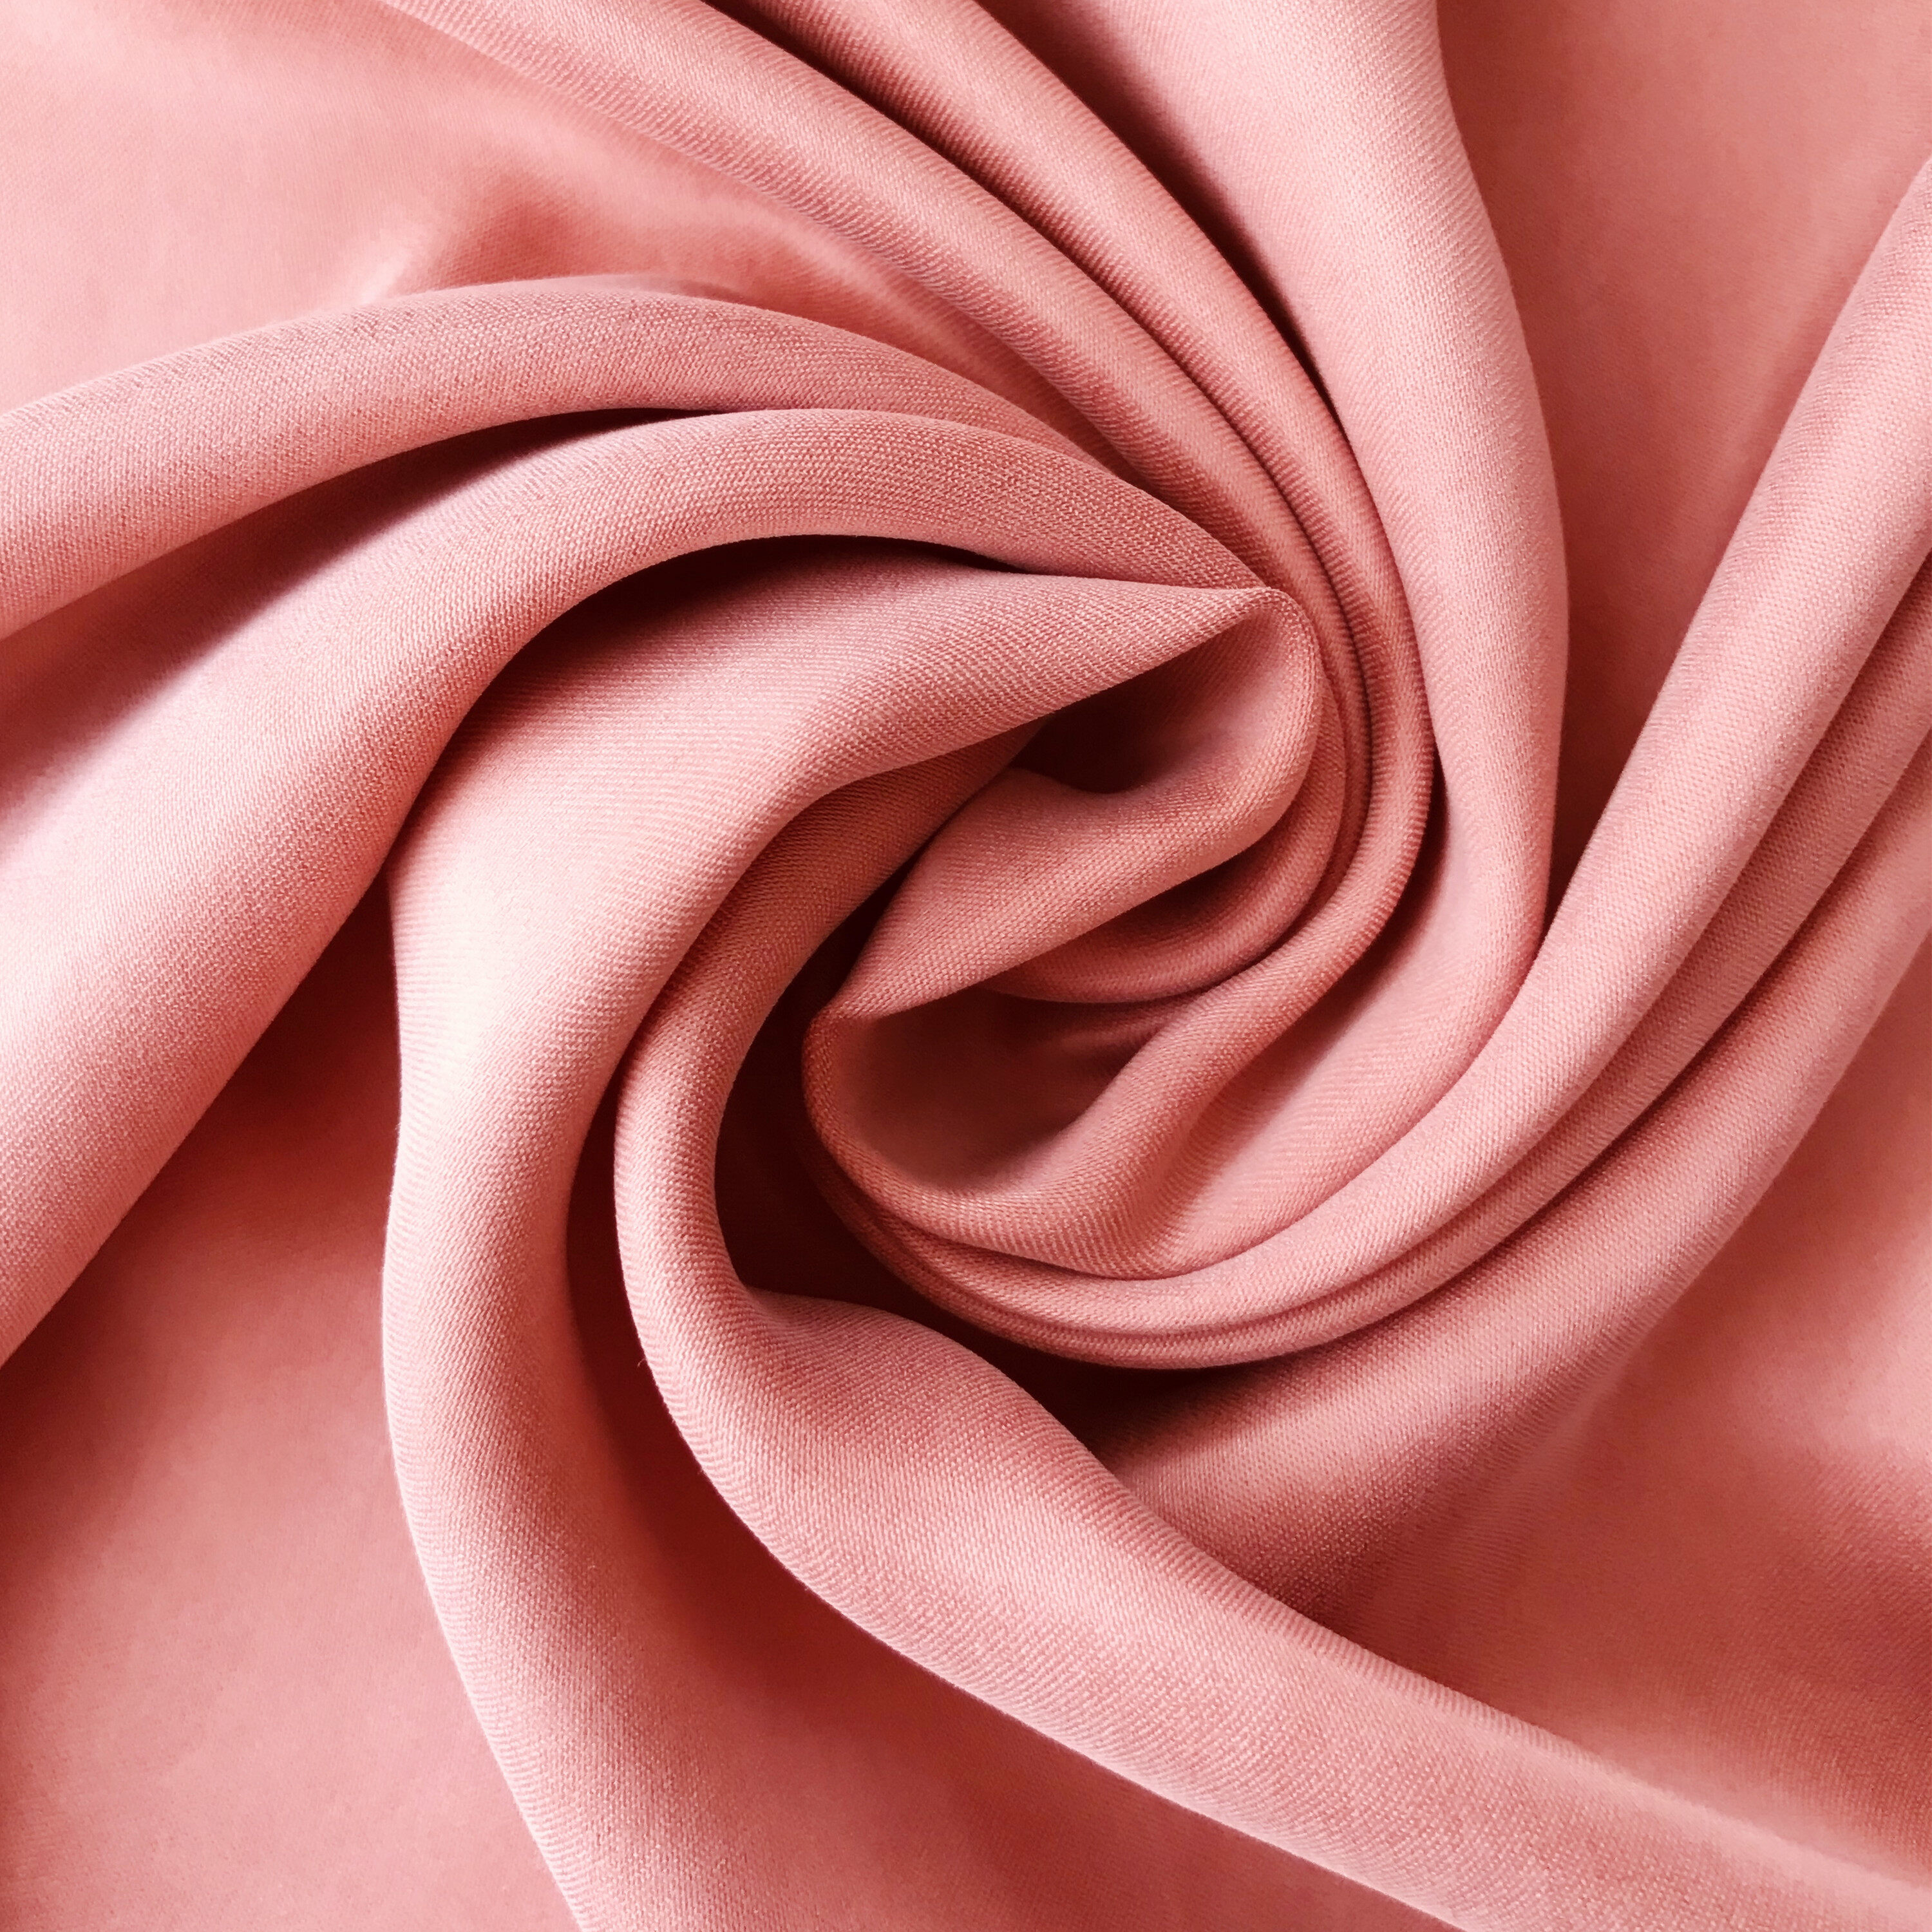 polyester viscose spandex fabric,polyester viscose elastane fabric,polyester viscose fabric manufacturer,polyester viscose fabric factory,polyester viscose fabric supplier